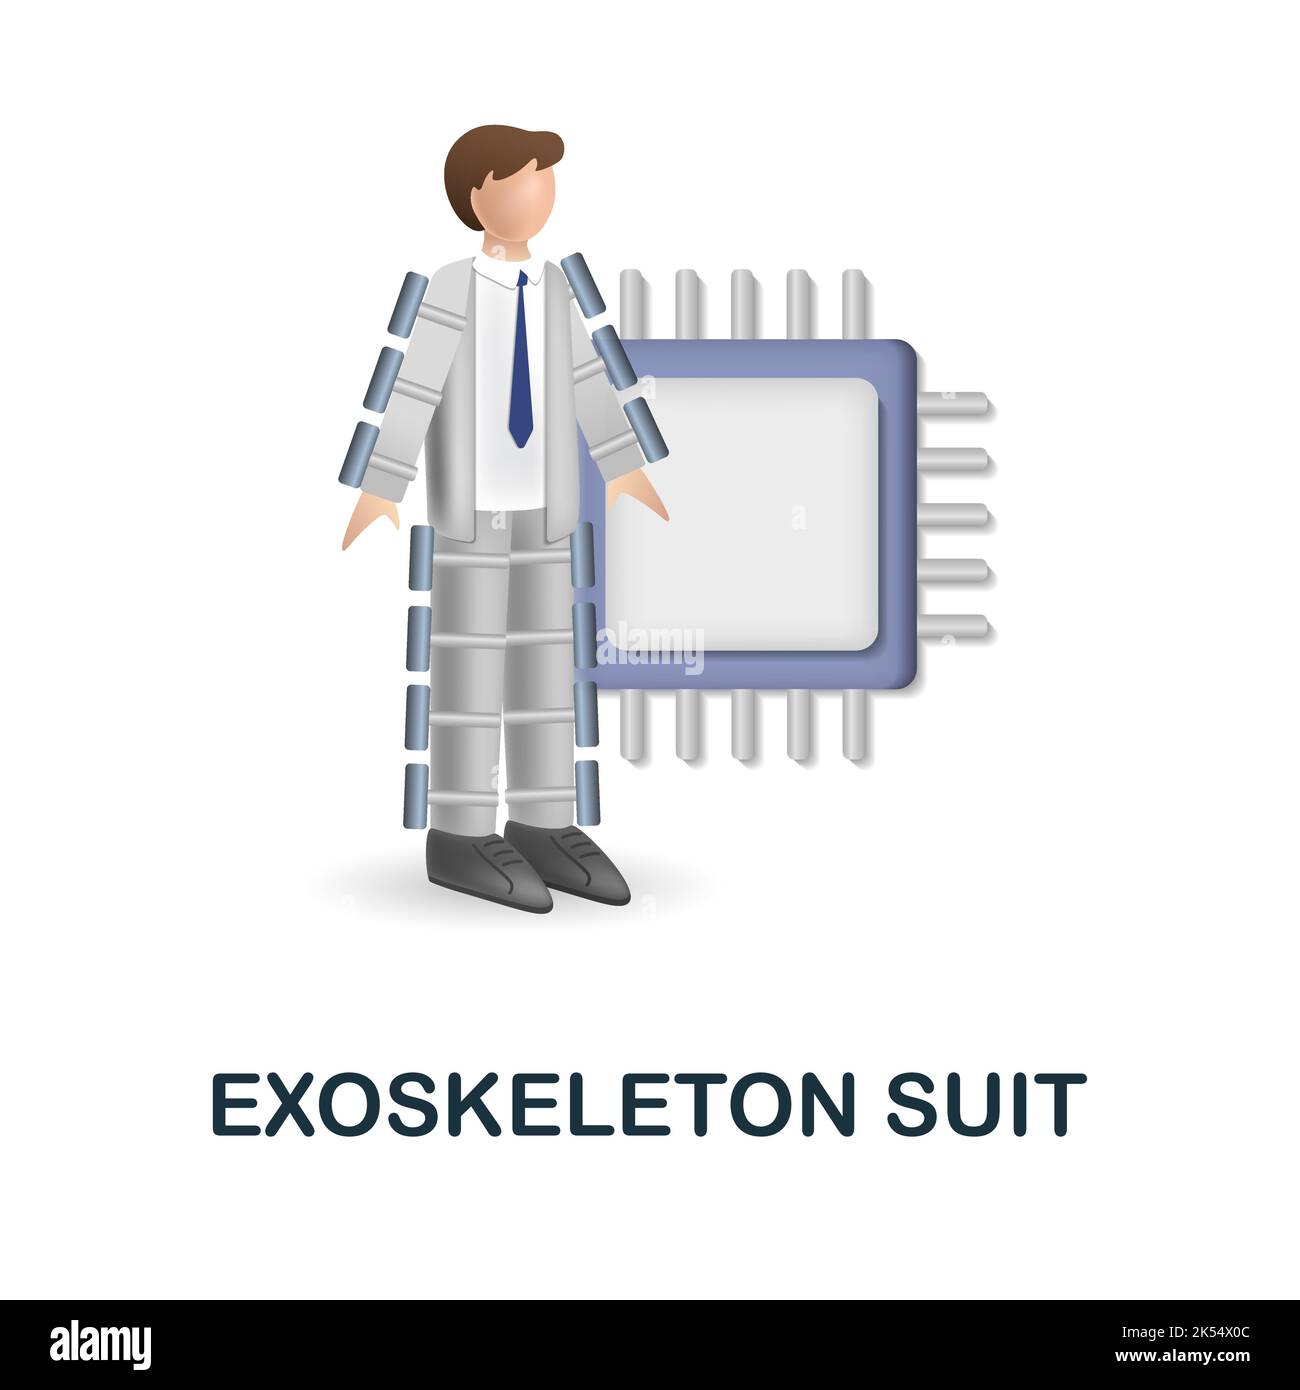 Exoskeleton Suit icon. 3d illustration from future technology collection. Creative Exoskeleton Suit 3d icon for web design, templates, infographics Stock Vector